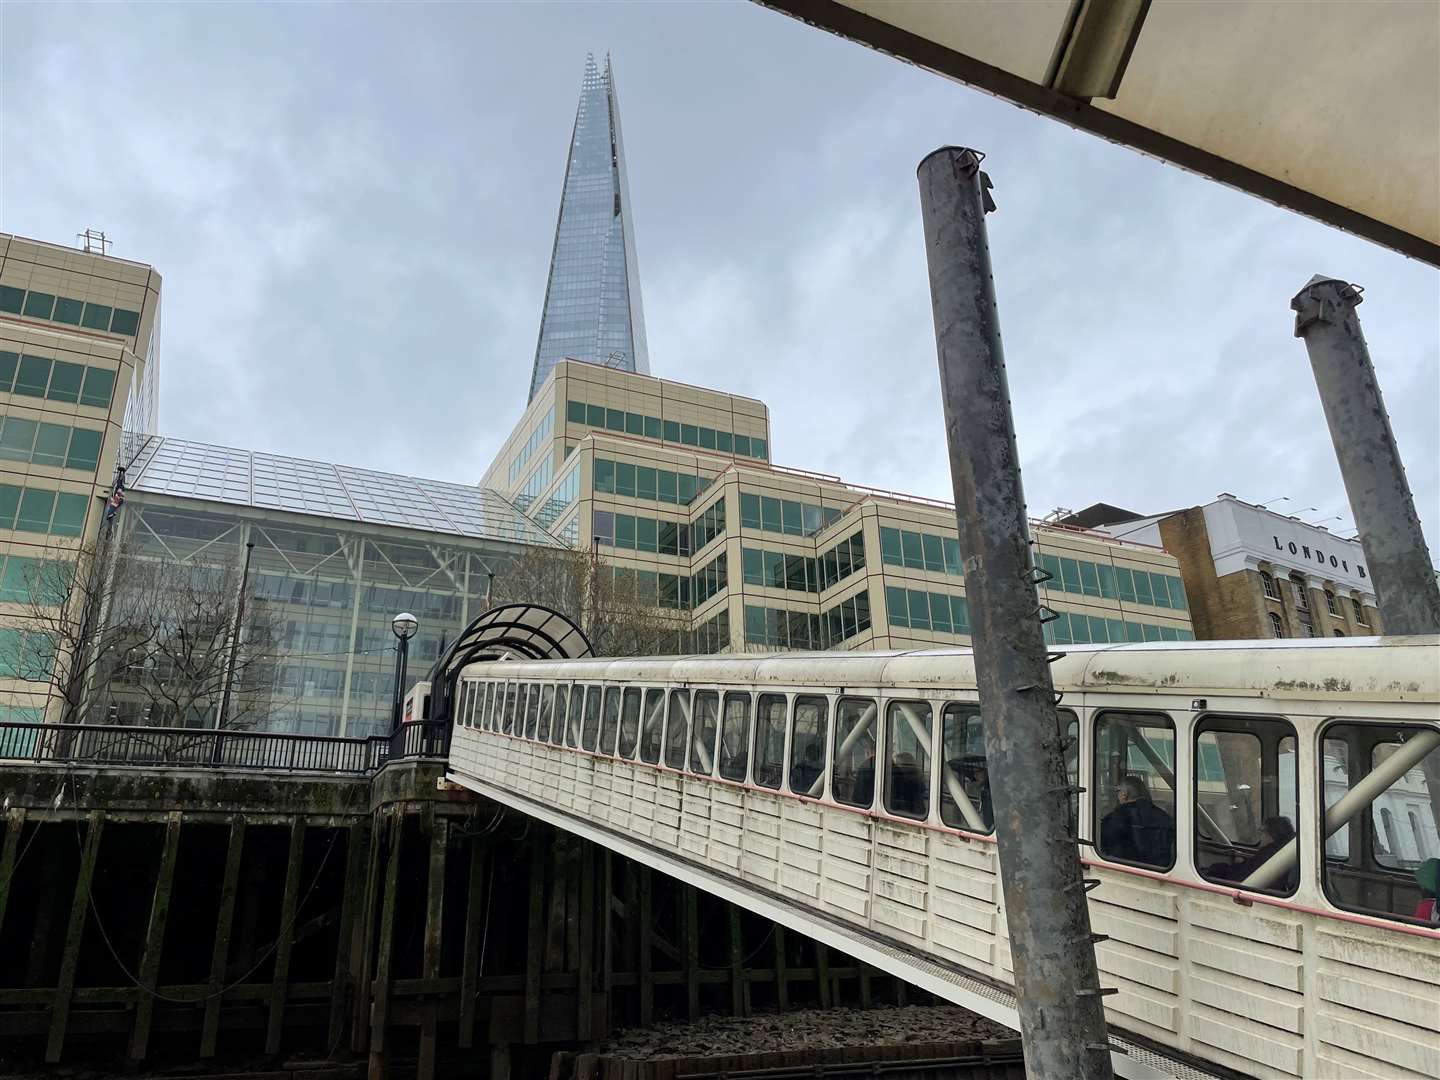 It took just over an hour to arrive at London Bridge pier